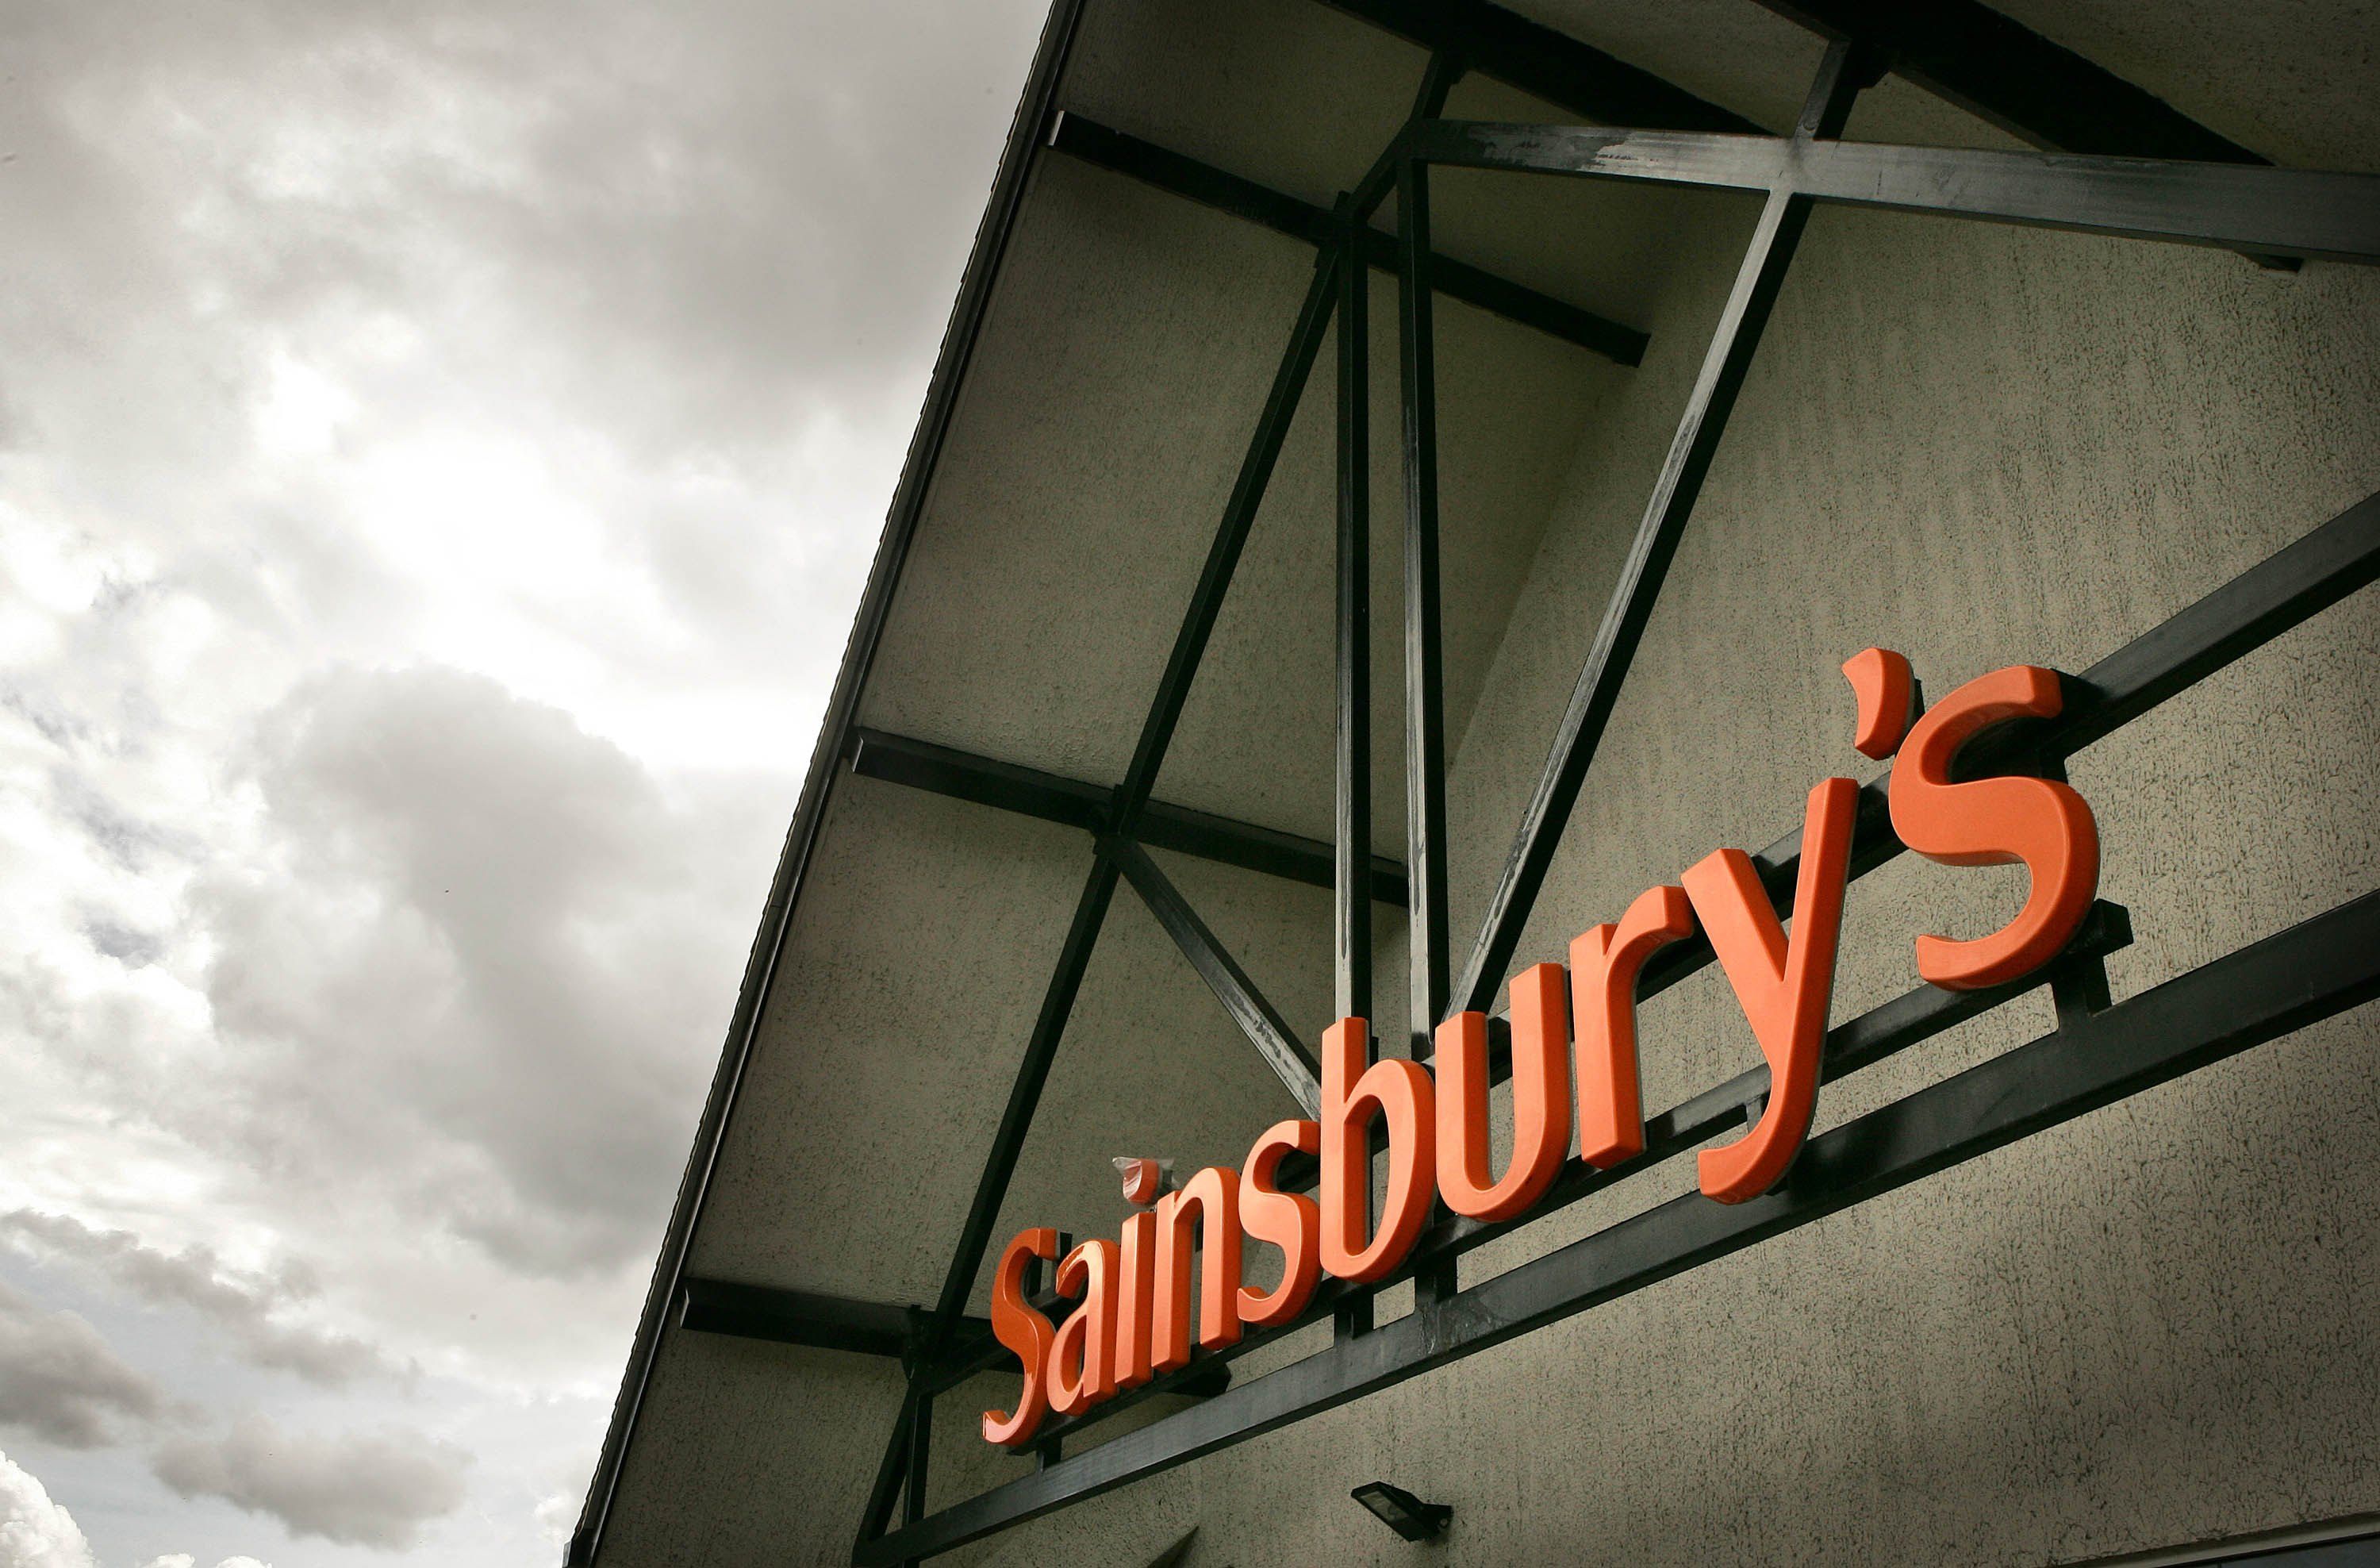 COBHAM, UNITED KINGDOM - MARCH 29: Sainsbury's at Cobham on March 29, 2006 in Surrey, England. Sainsbury's has posted better than expected sales increases for the fifth consecutive quarter. (Photo by Peter Macdiarmid/Getty Images)